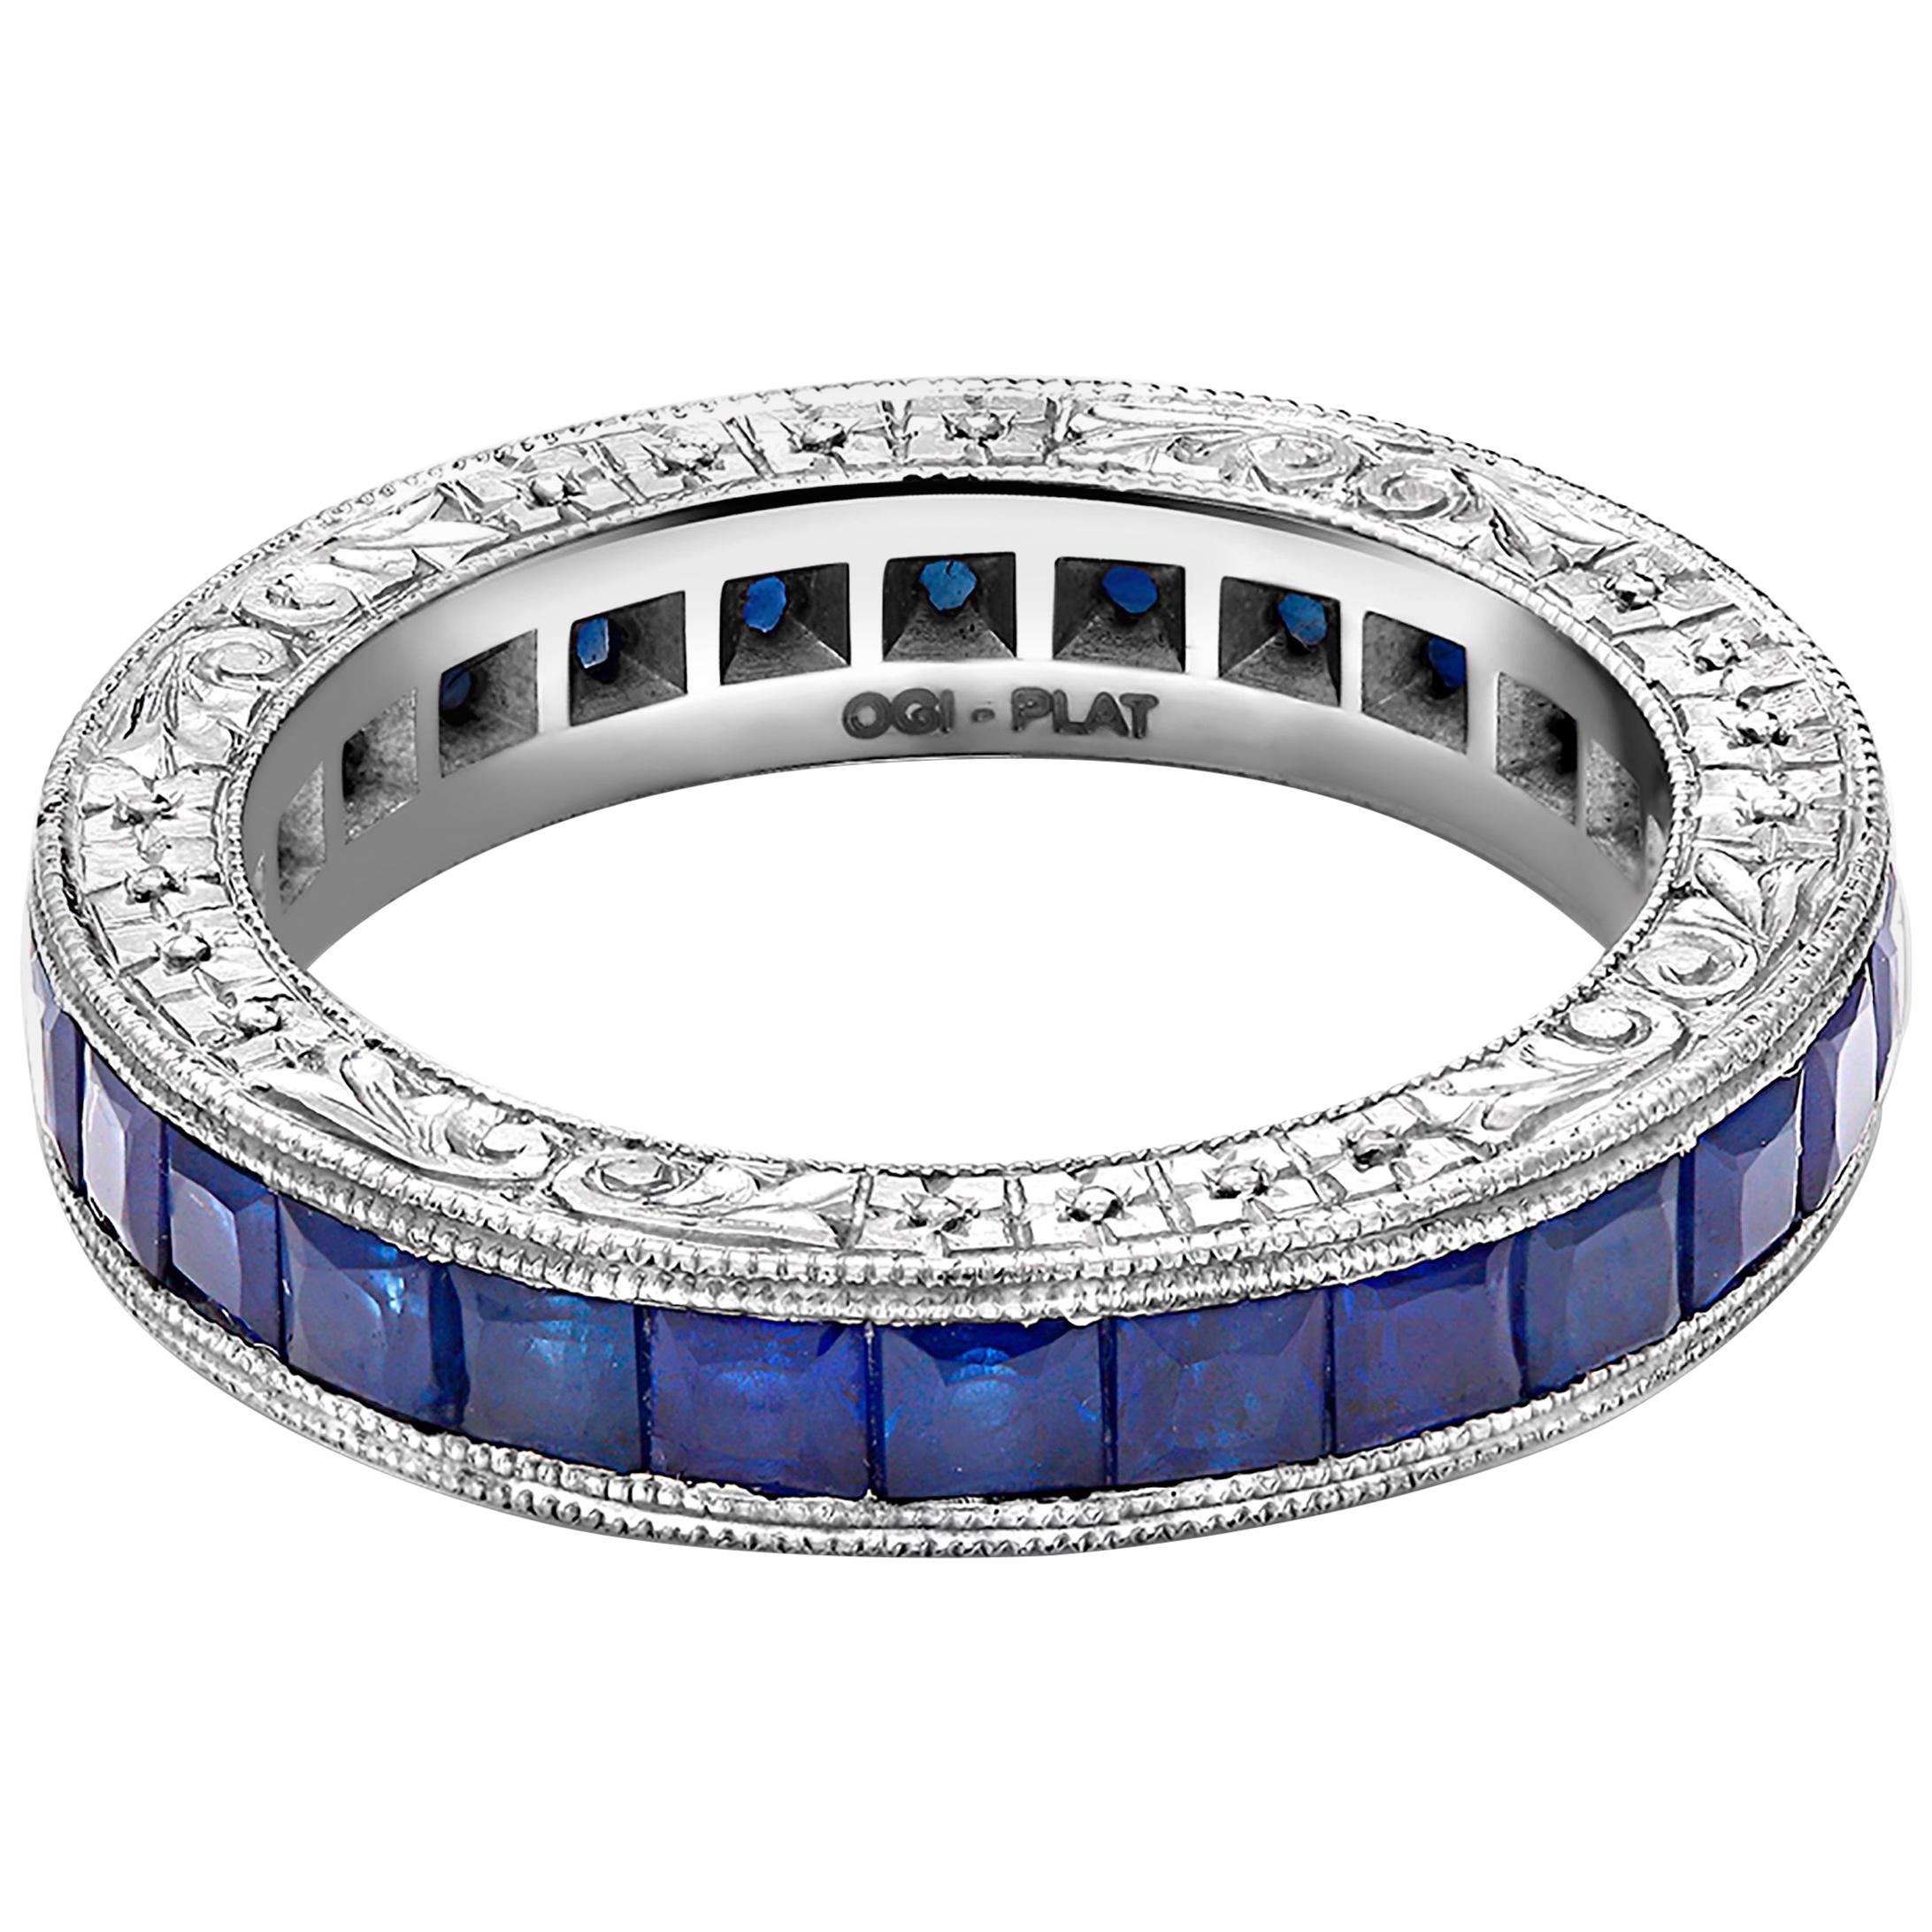 Platinum eternity ring with princess-cut sapphire 
Hand engraved by old master engraver
Sapphires weighing 2.75 carat 
Ring size 5
New Ring
Handmade in the USA
Our team of graduate gemologists carefully hand-select every diamond and gemstone
Our